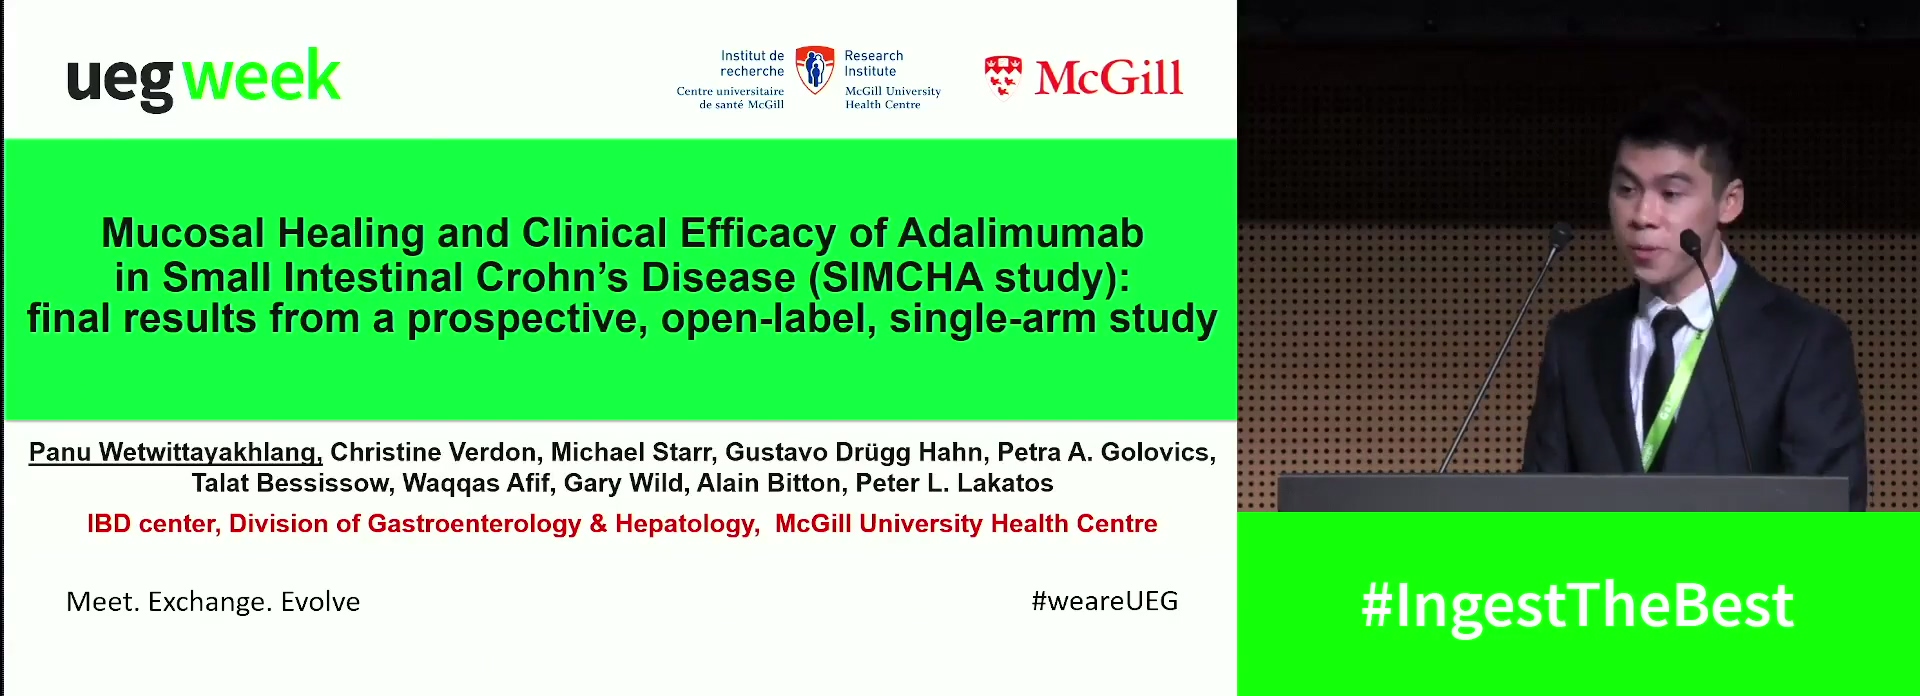 MUCOSAL HEALING AND CLINICAL EFFICACY OF ADALIMUMAB IN SMALL INTESTINAL CROHN’S DISEASE (SIMCHA STUDY):FINAL RESULTS FROM A PROSPECTIVE, OPEN-LABEL, SINGLE-ARM STUDY